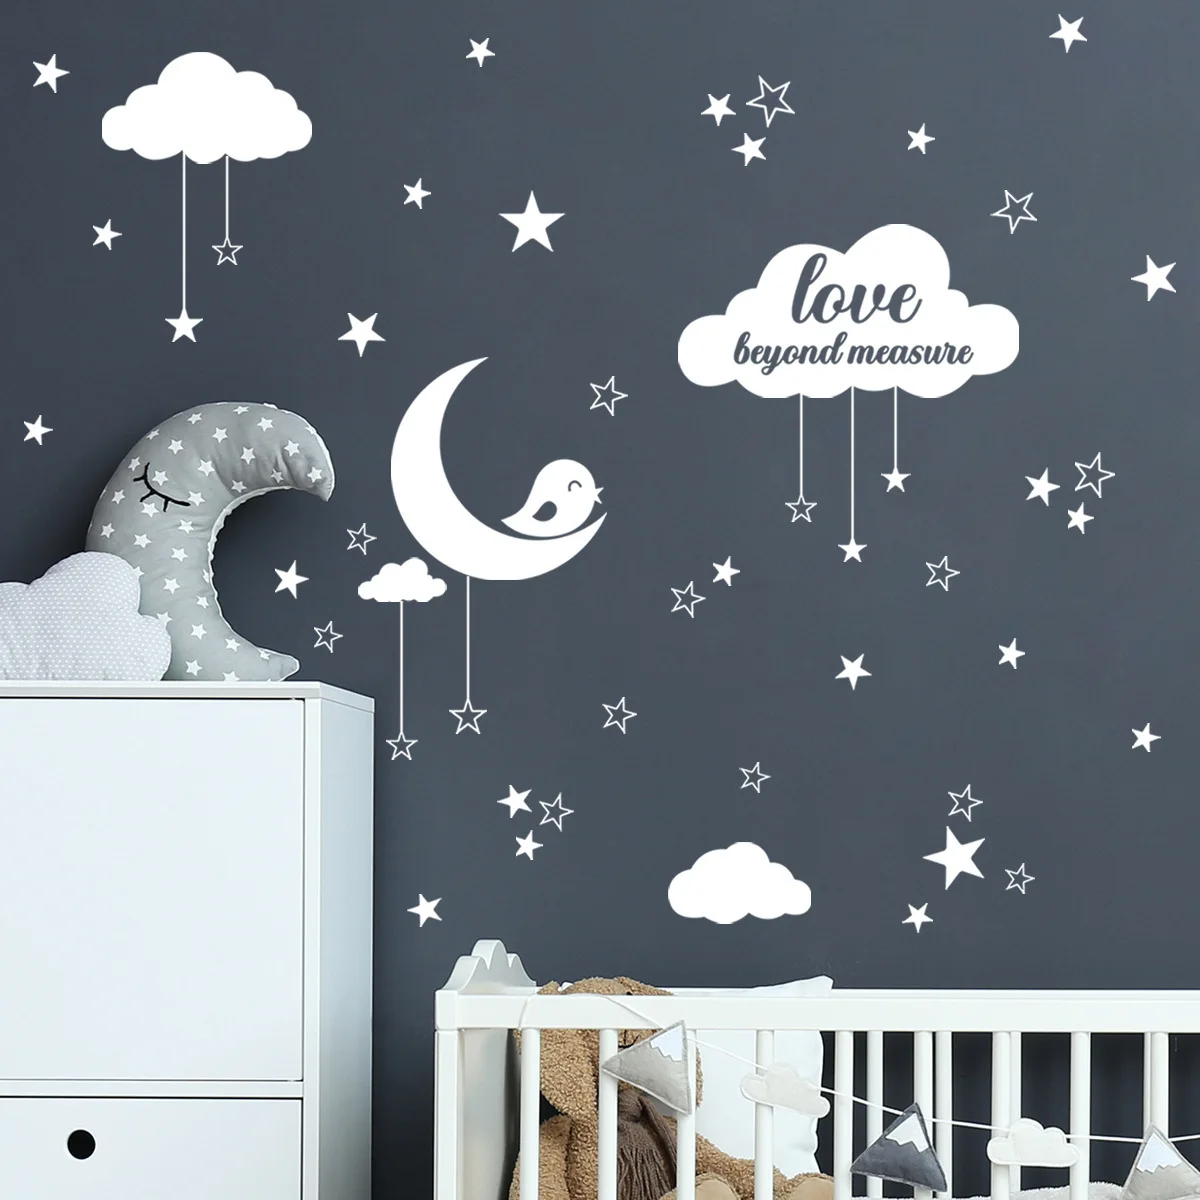 29*50cm Clouds, Moon And Stars English Wall Sticker Backwall Living Room Living Room Bedroom Study Decorative Mural Wall Sticker